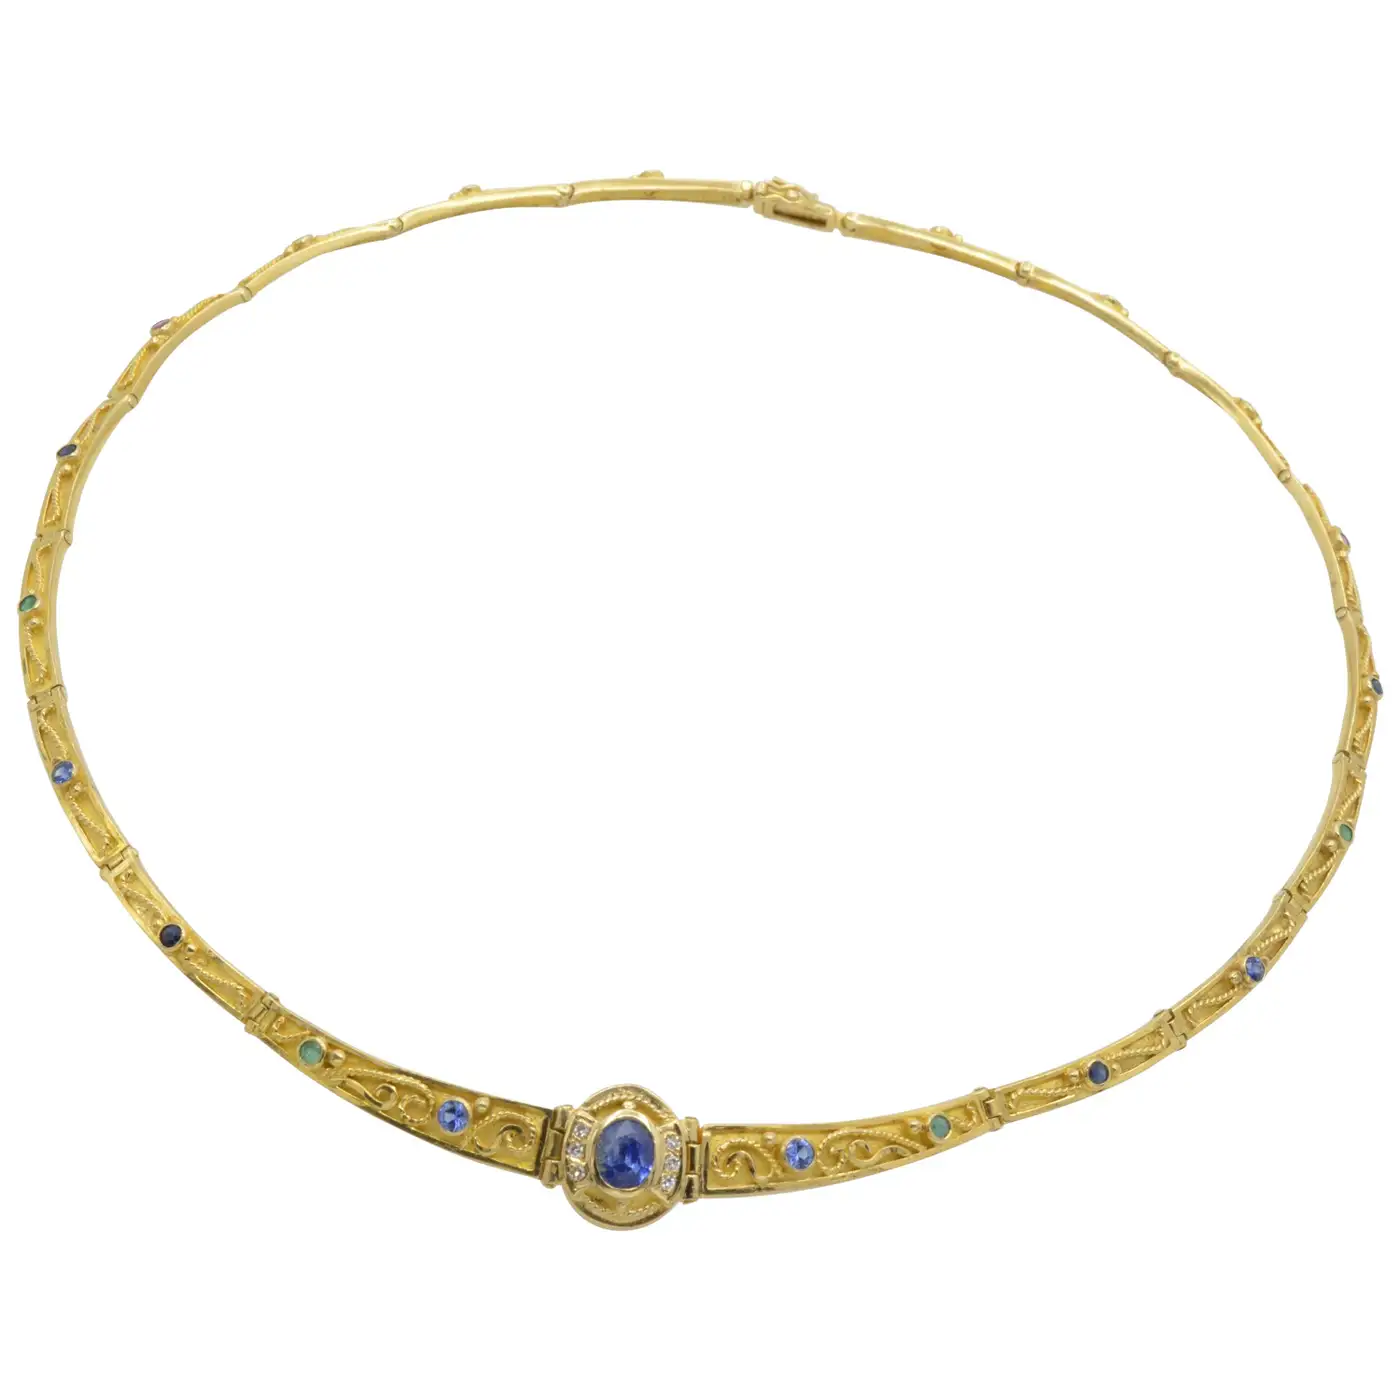 Gold Greek Collar 18K and Sapphires